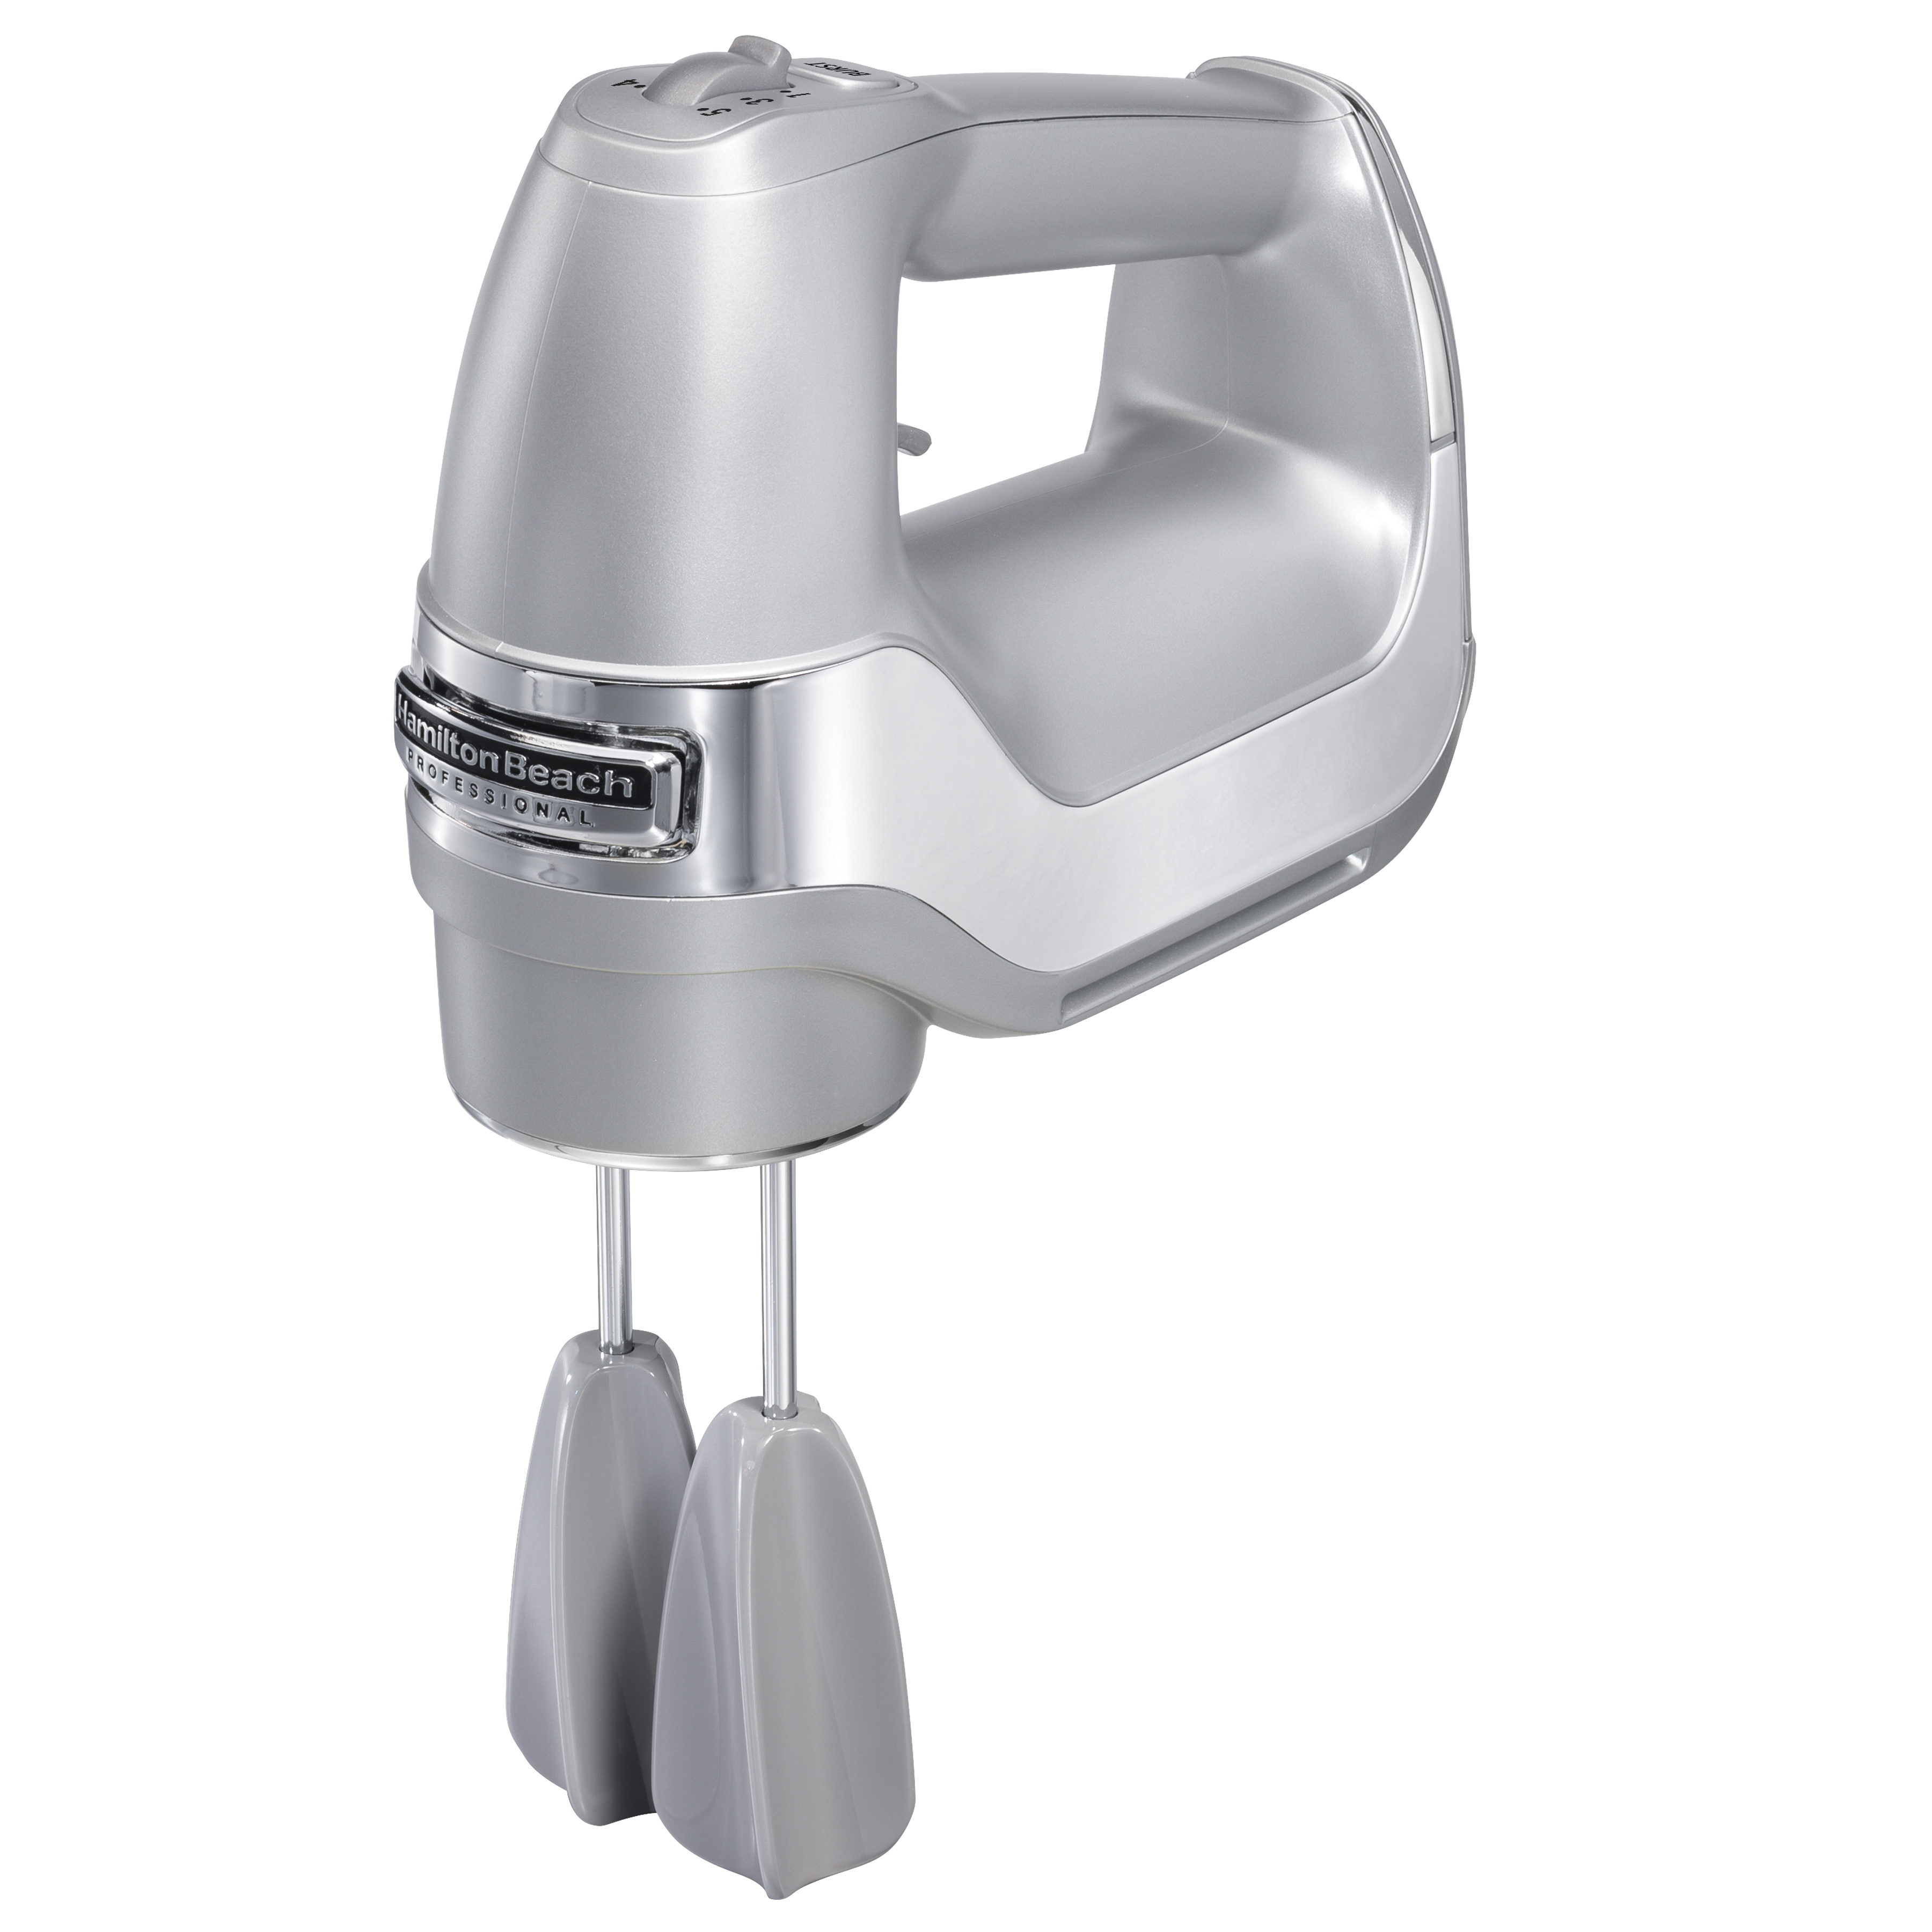 Hamilton Beach Professional 5-Speed Electric Hand Mixer, High Performance DC Motor, QuickBurst, Slow Start Speed, Easy Clean Beaters and Whisk, Silver, 62664 - image 1 of 7